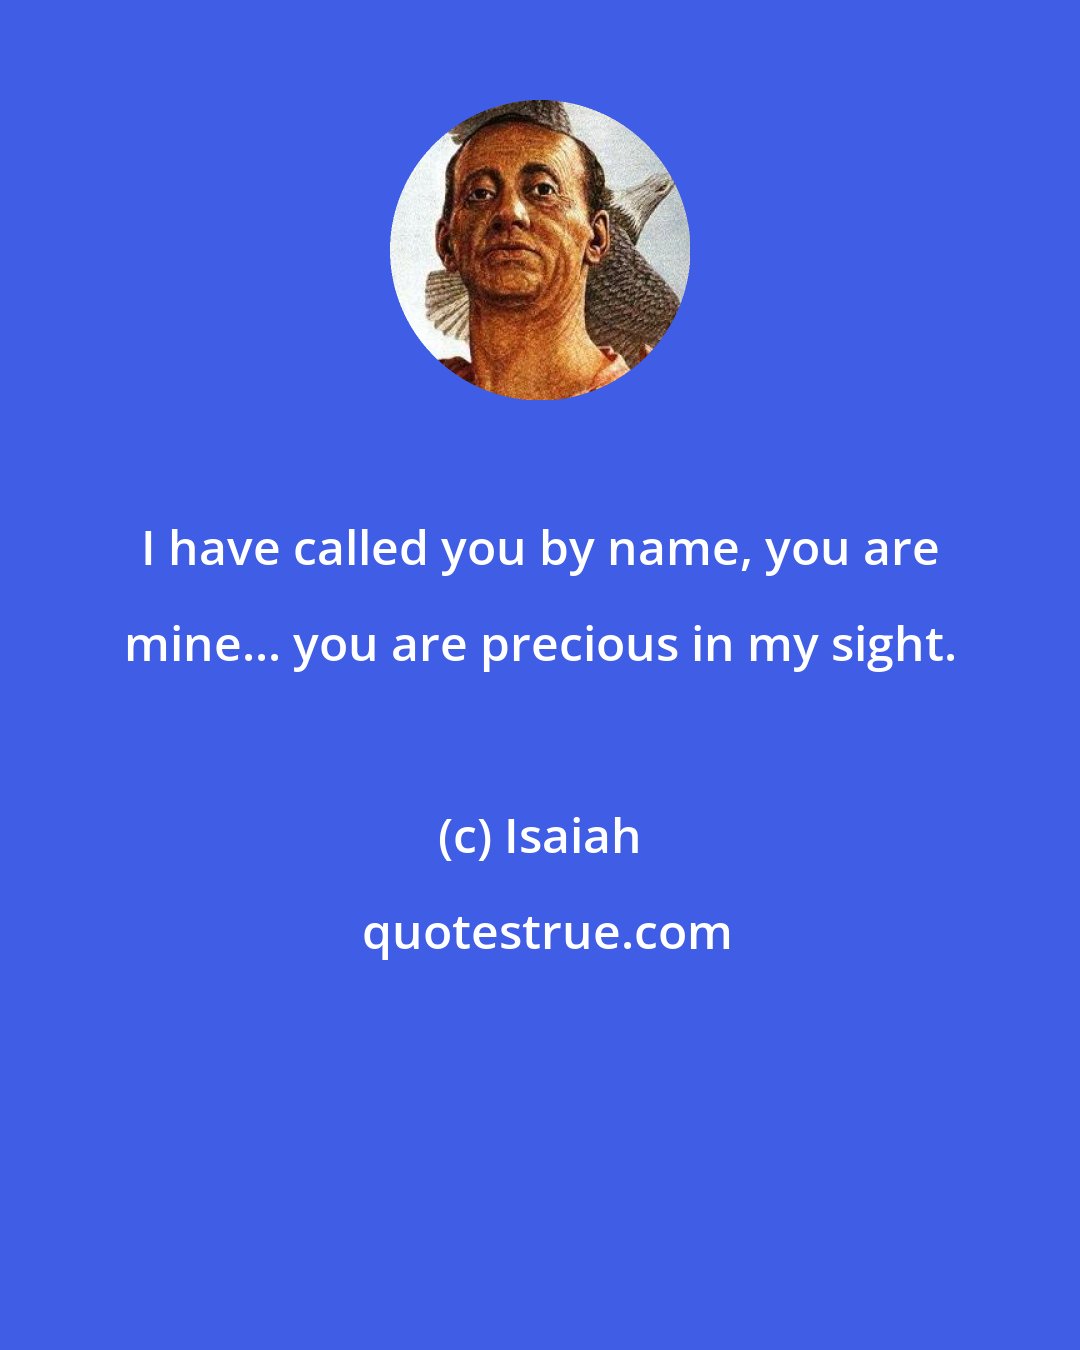 Isaiah: I have called you by name, you are mine... you are precious in my sight.